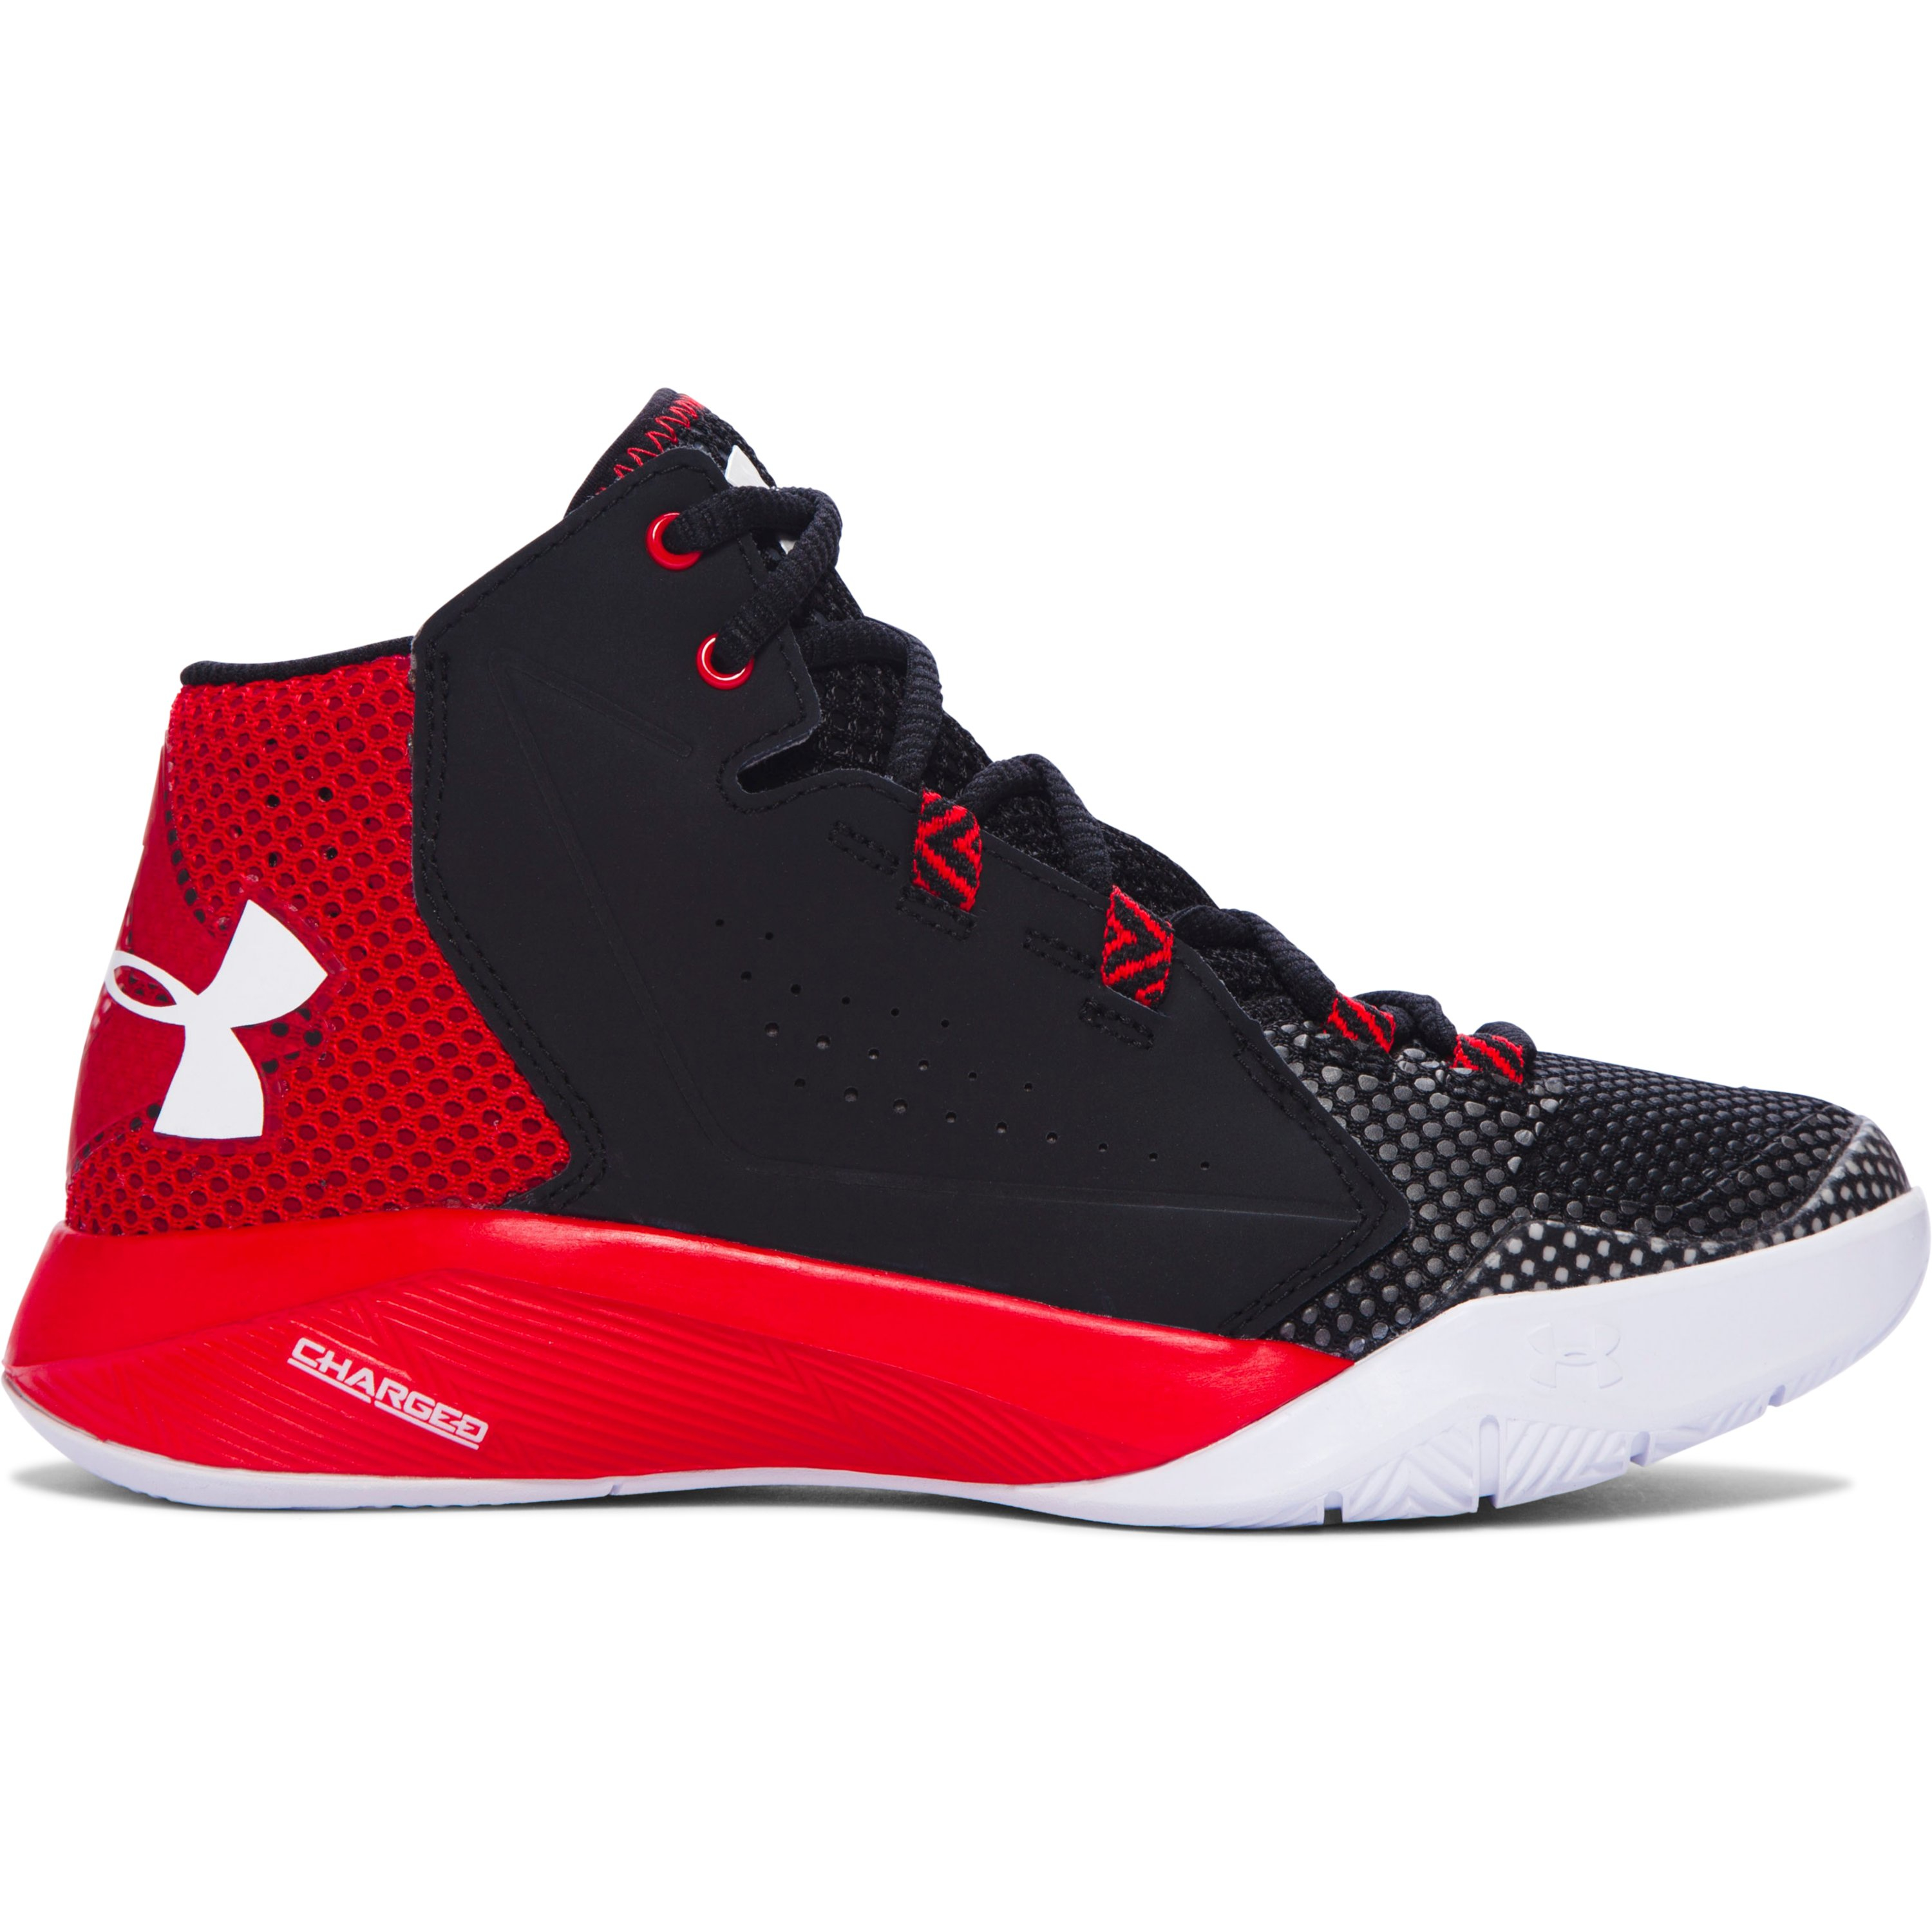 Lyst - Under Armour Women's Ua Torch Fade Basketball Shoes